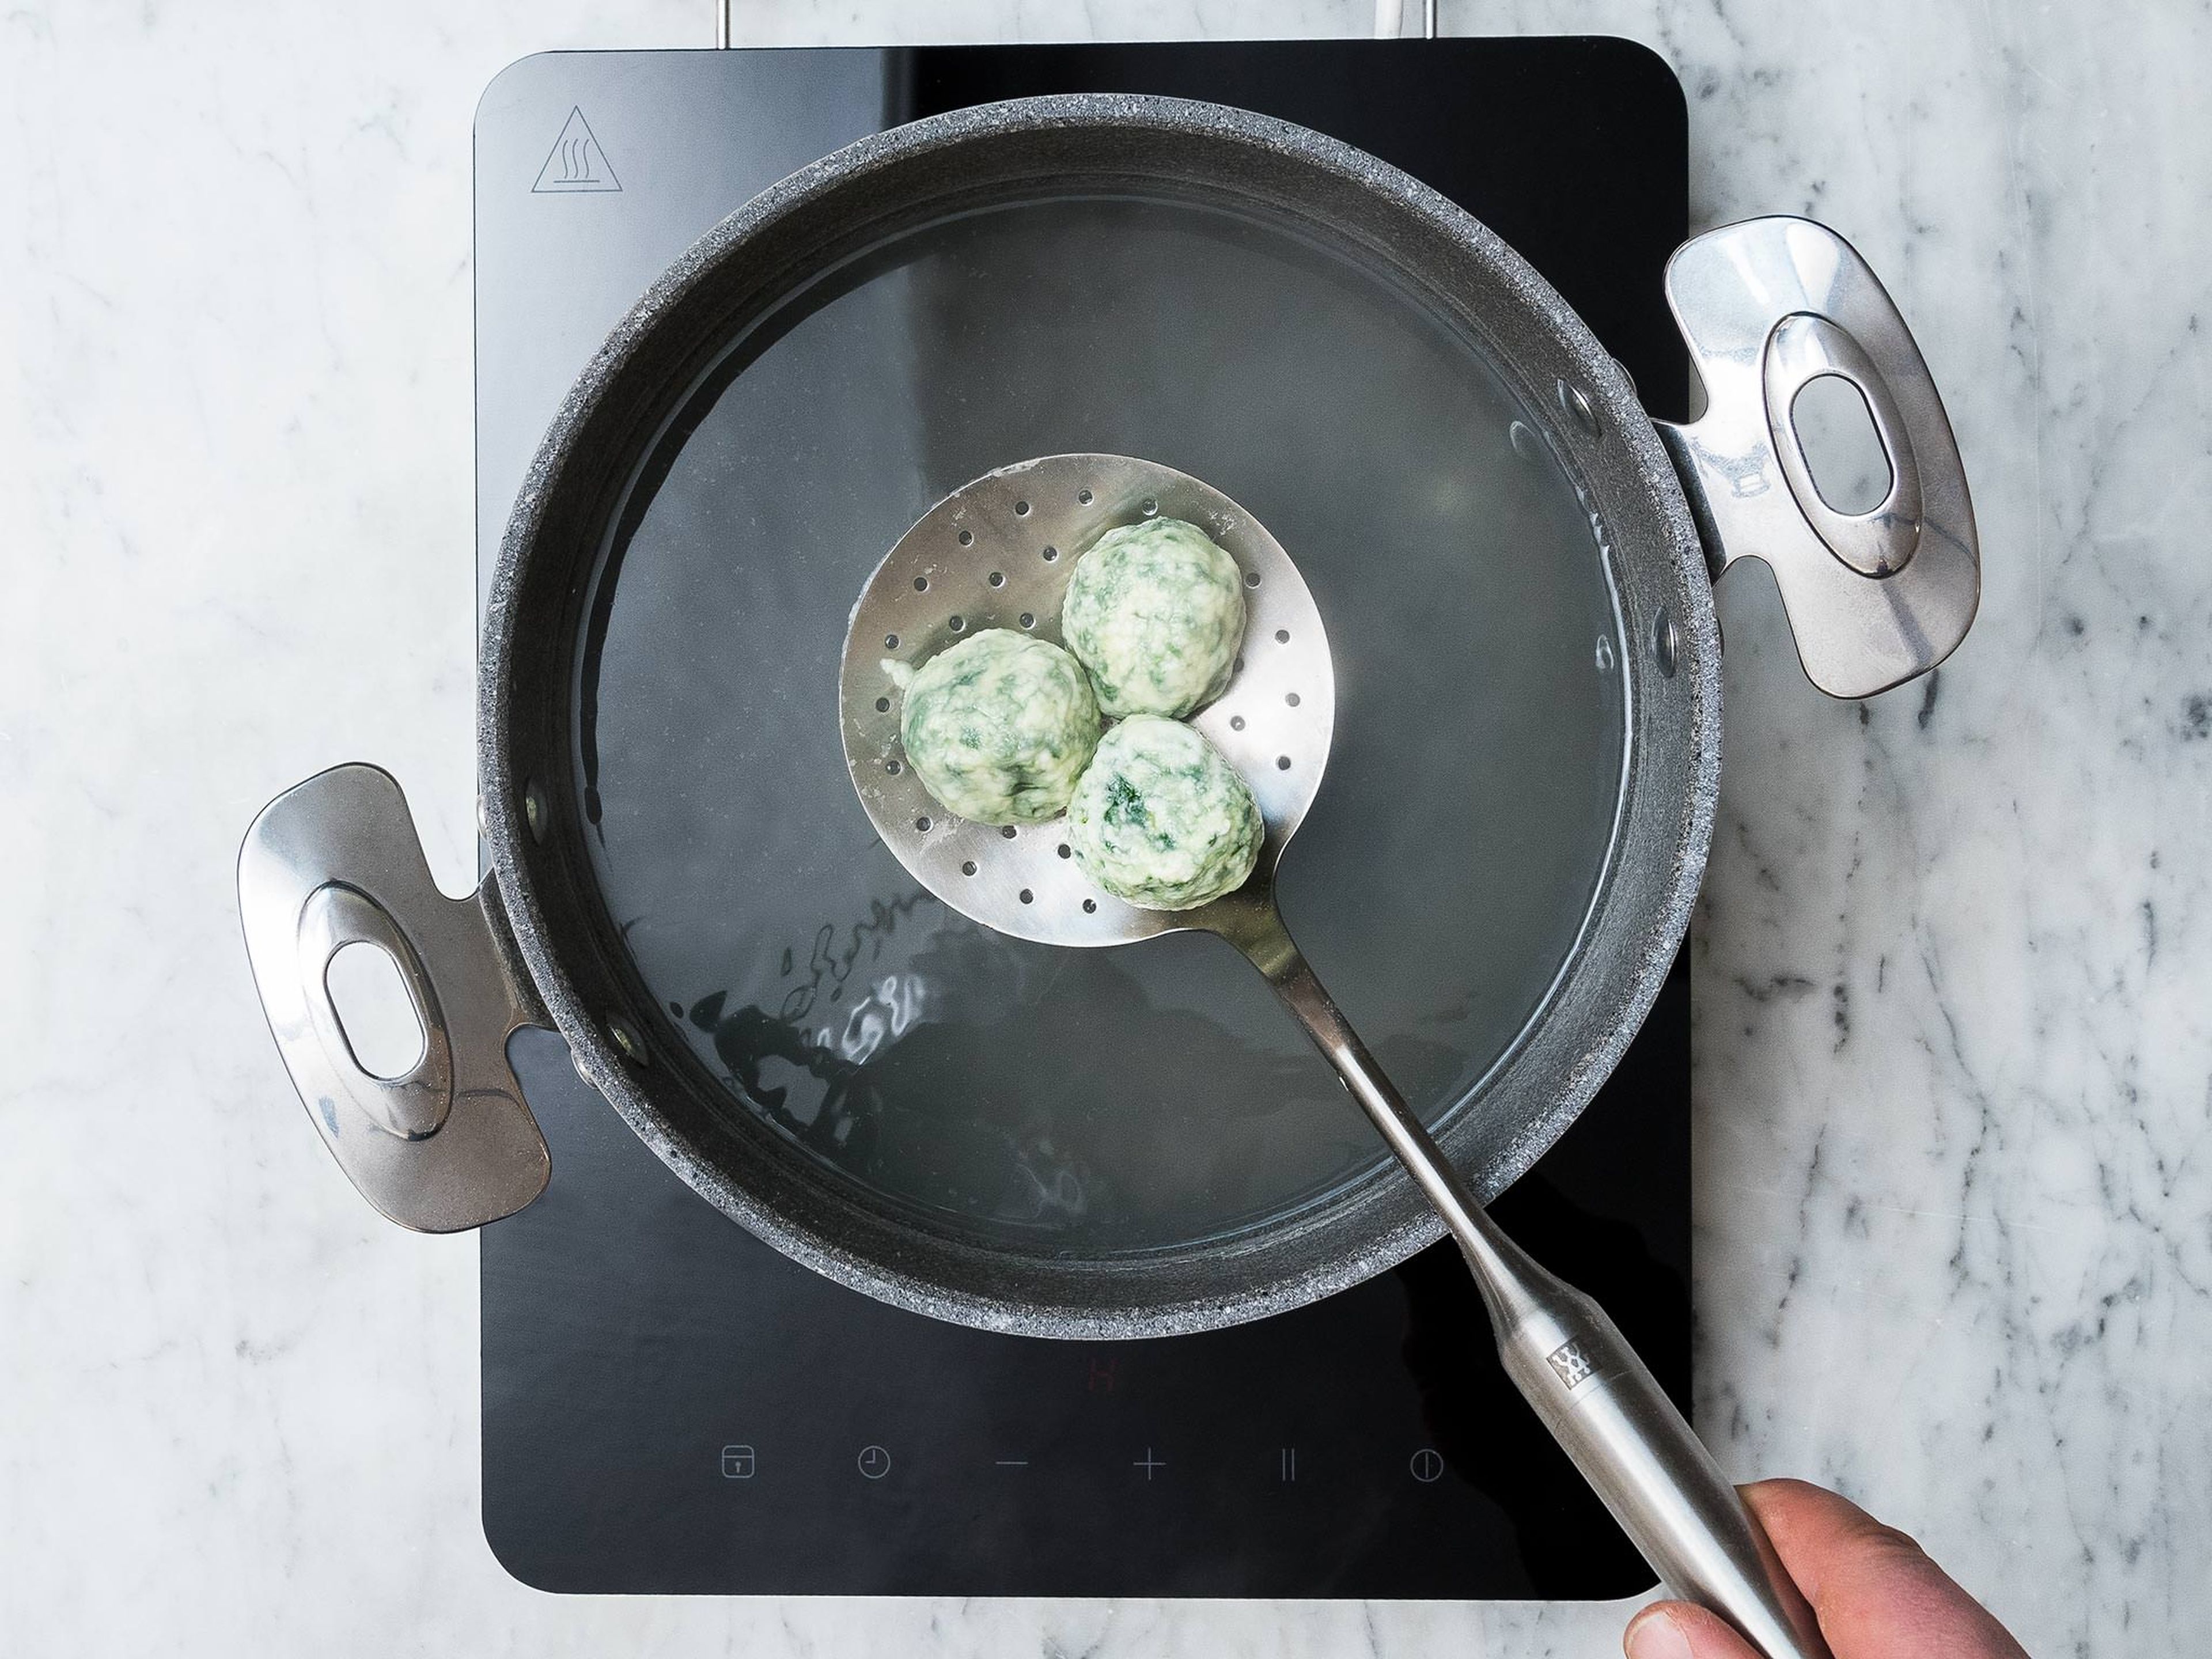 Prepare a large pot of generously salted water and bring to a simmer. Carefully drop the gnudi into the water and cook for approx. 4 - 5 min. or until they begin to float to the surface. Reserve some of the gnudi cooking water.